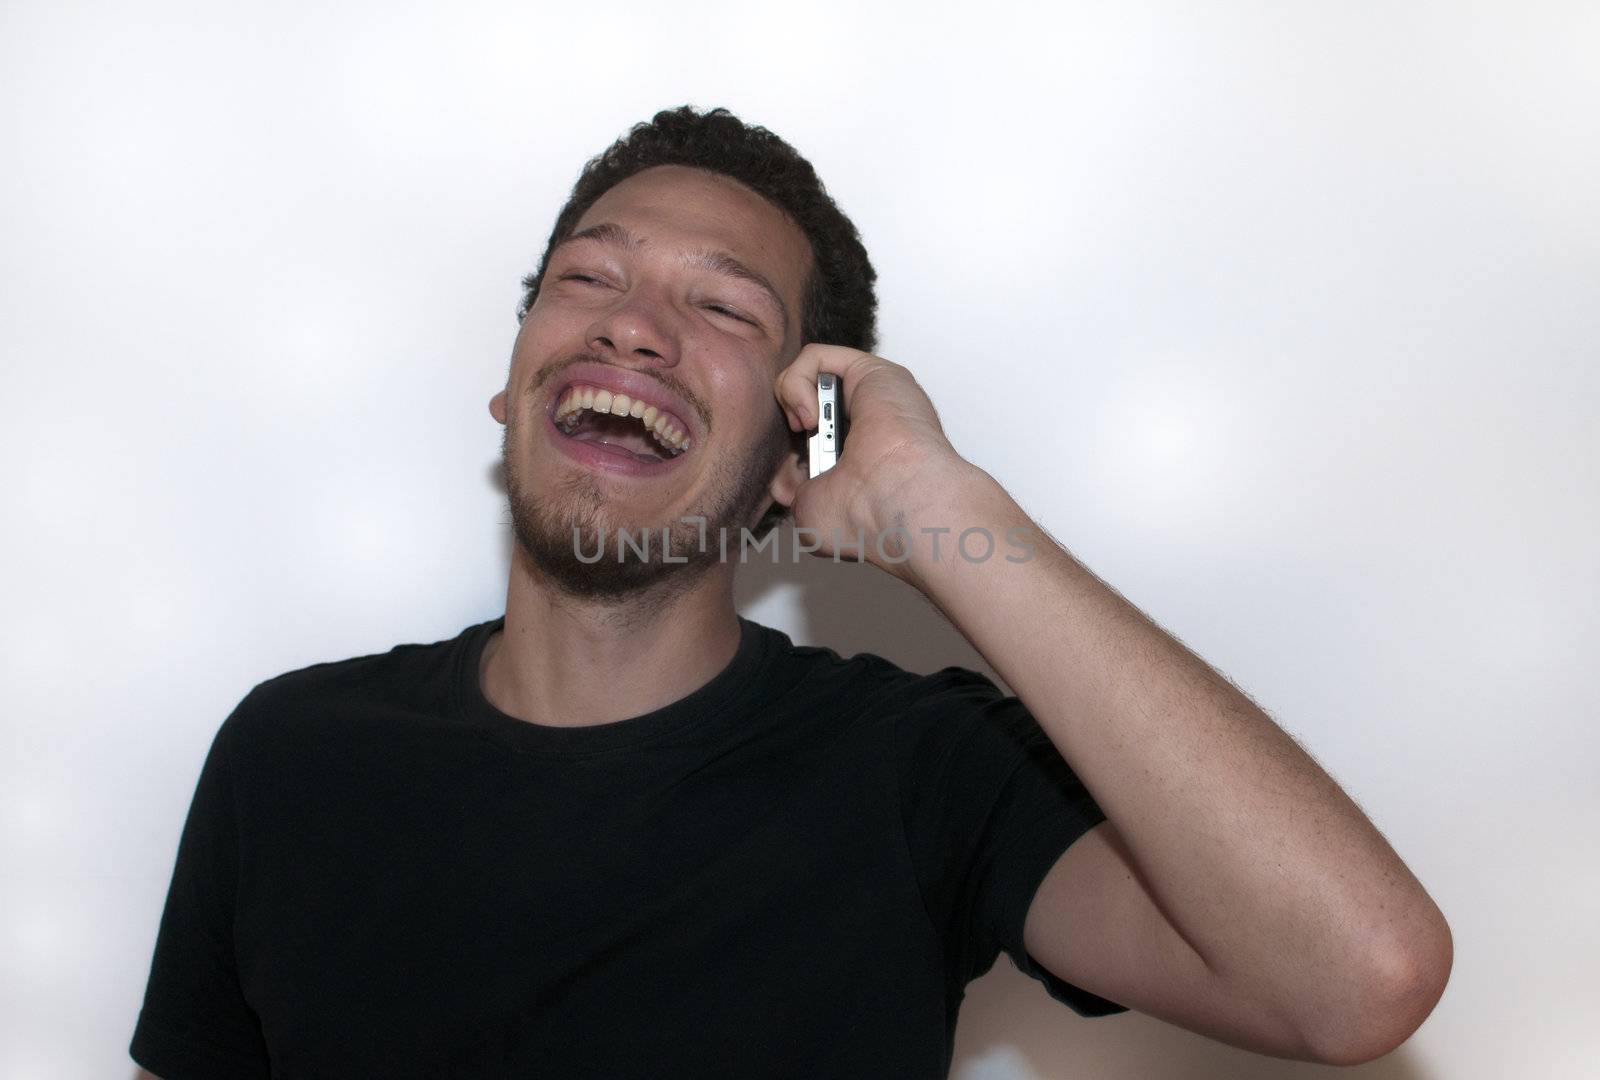 Casual young man laughing on the phone on isolated background